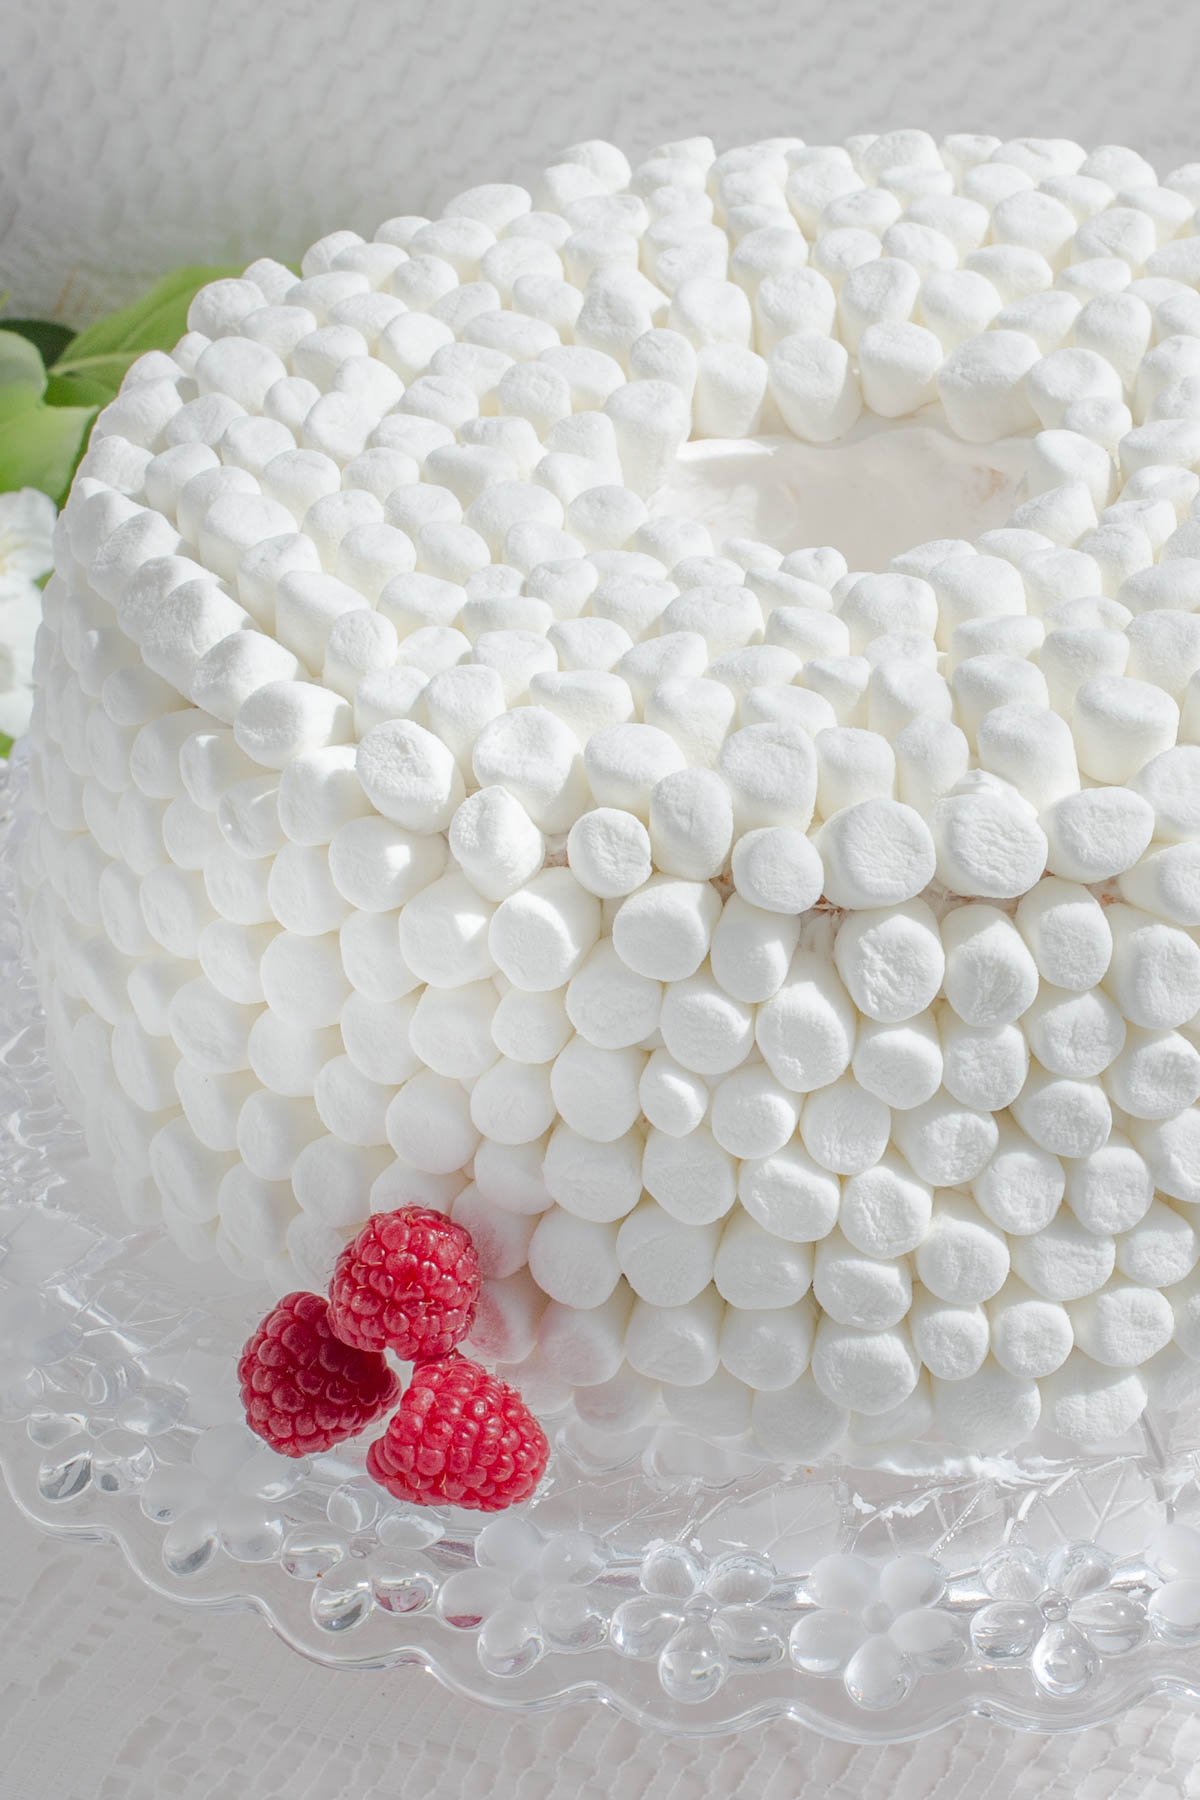 Angel food cake decorated with white miniature marshmallows and garnished with 3 fresh raspberries.